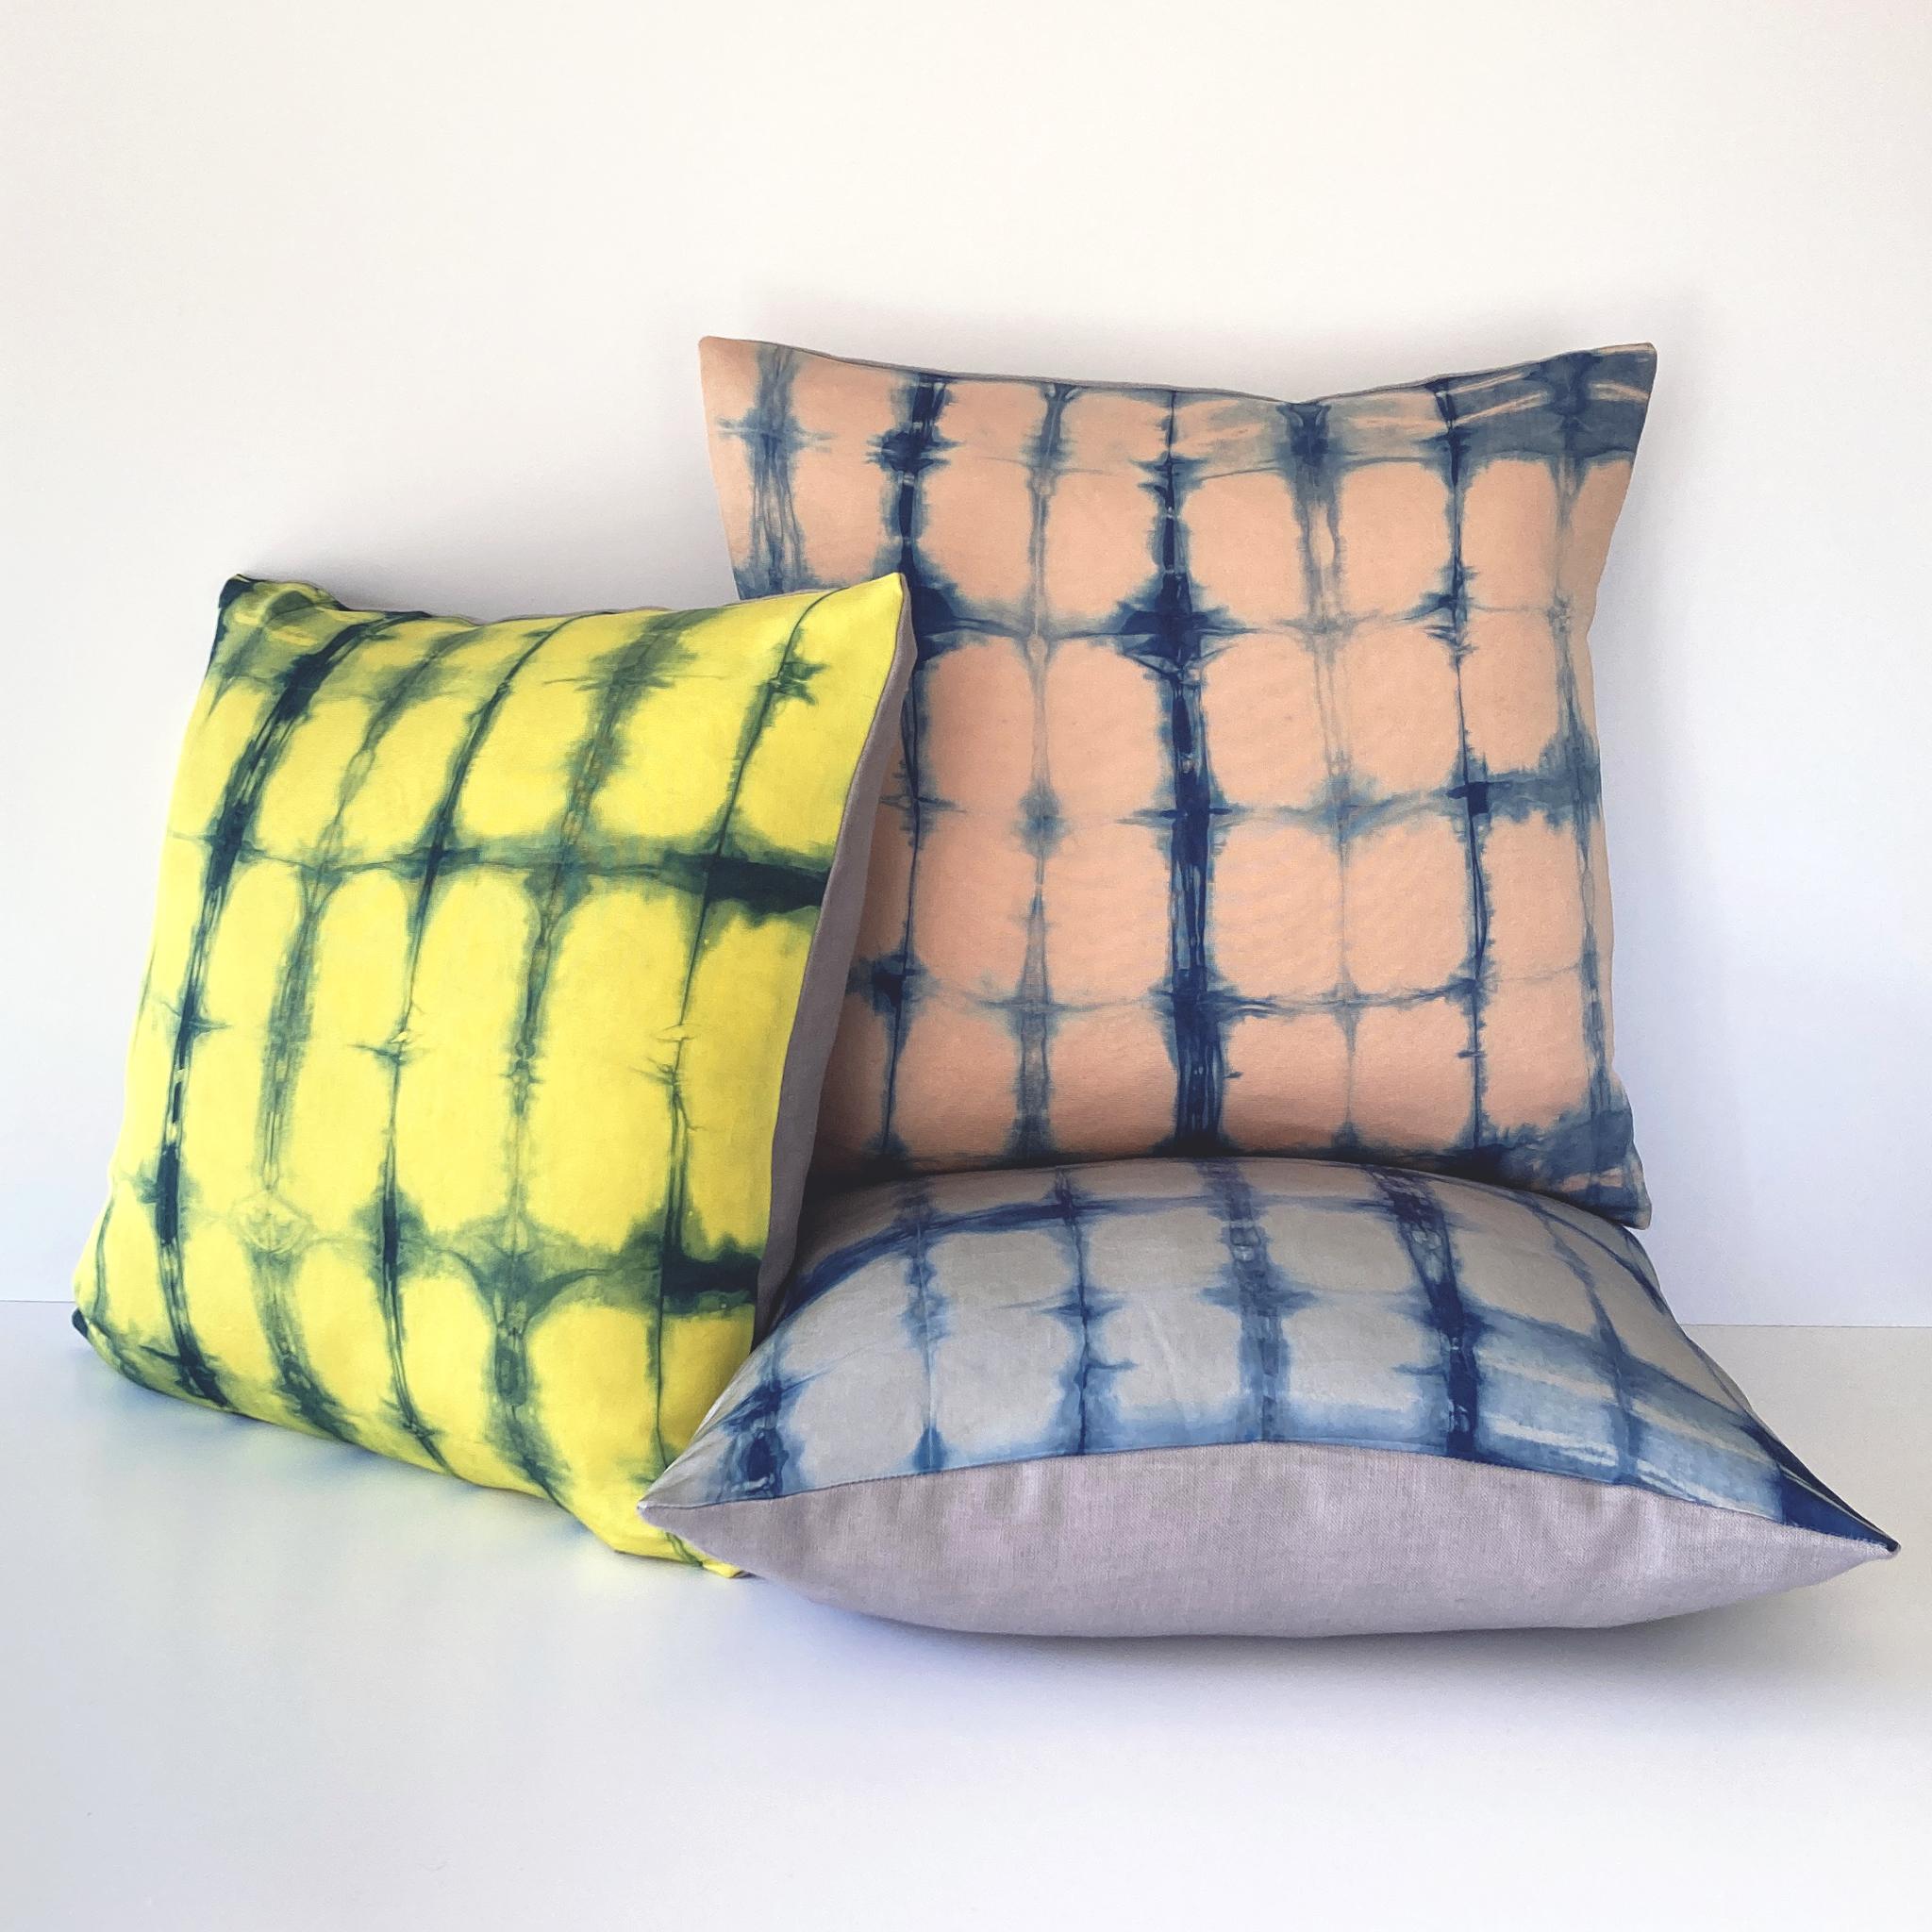 Canary yellow silk faille pillow dyed with indigo in Grid pattern with gray linen backing. Hand-dyed and sewn in New York City, down pillow insert made locally in NYC. Pillow measures 18 x 18 inches. Each silk pillow is hand made and one of a